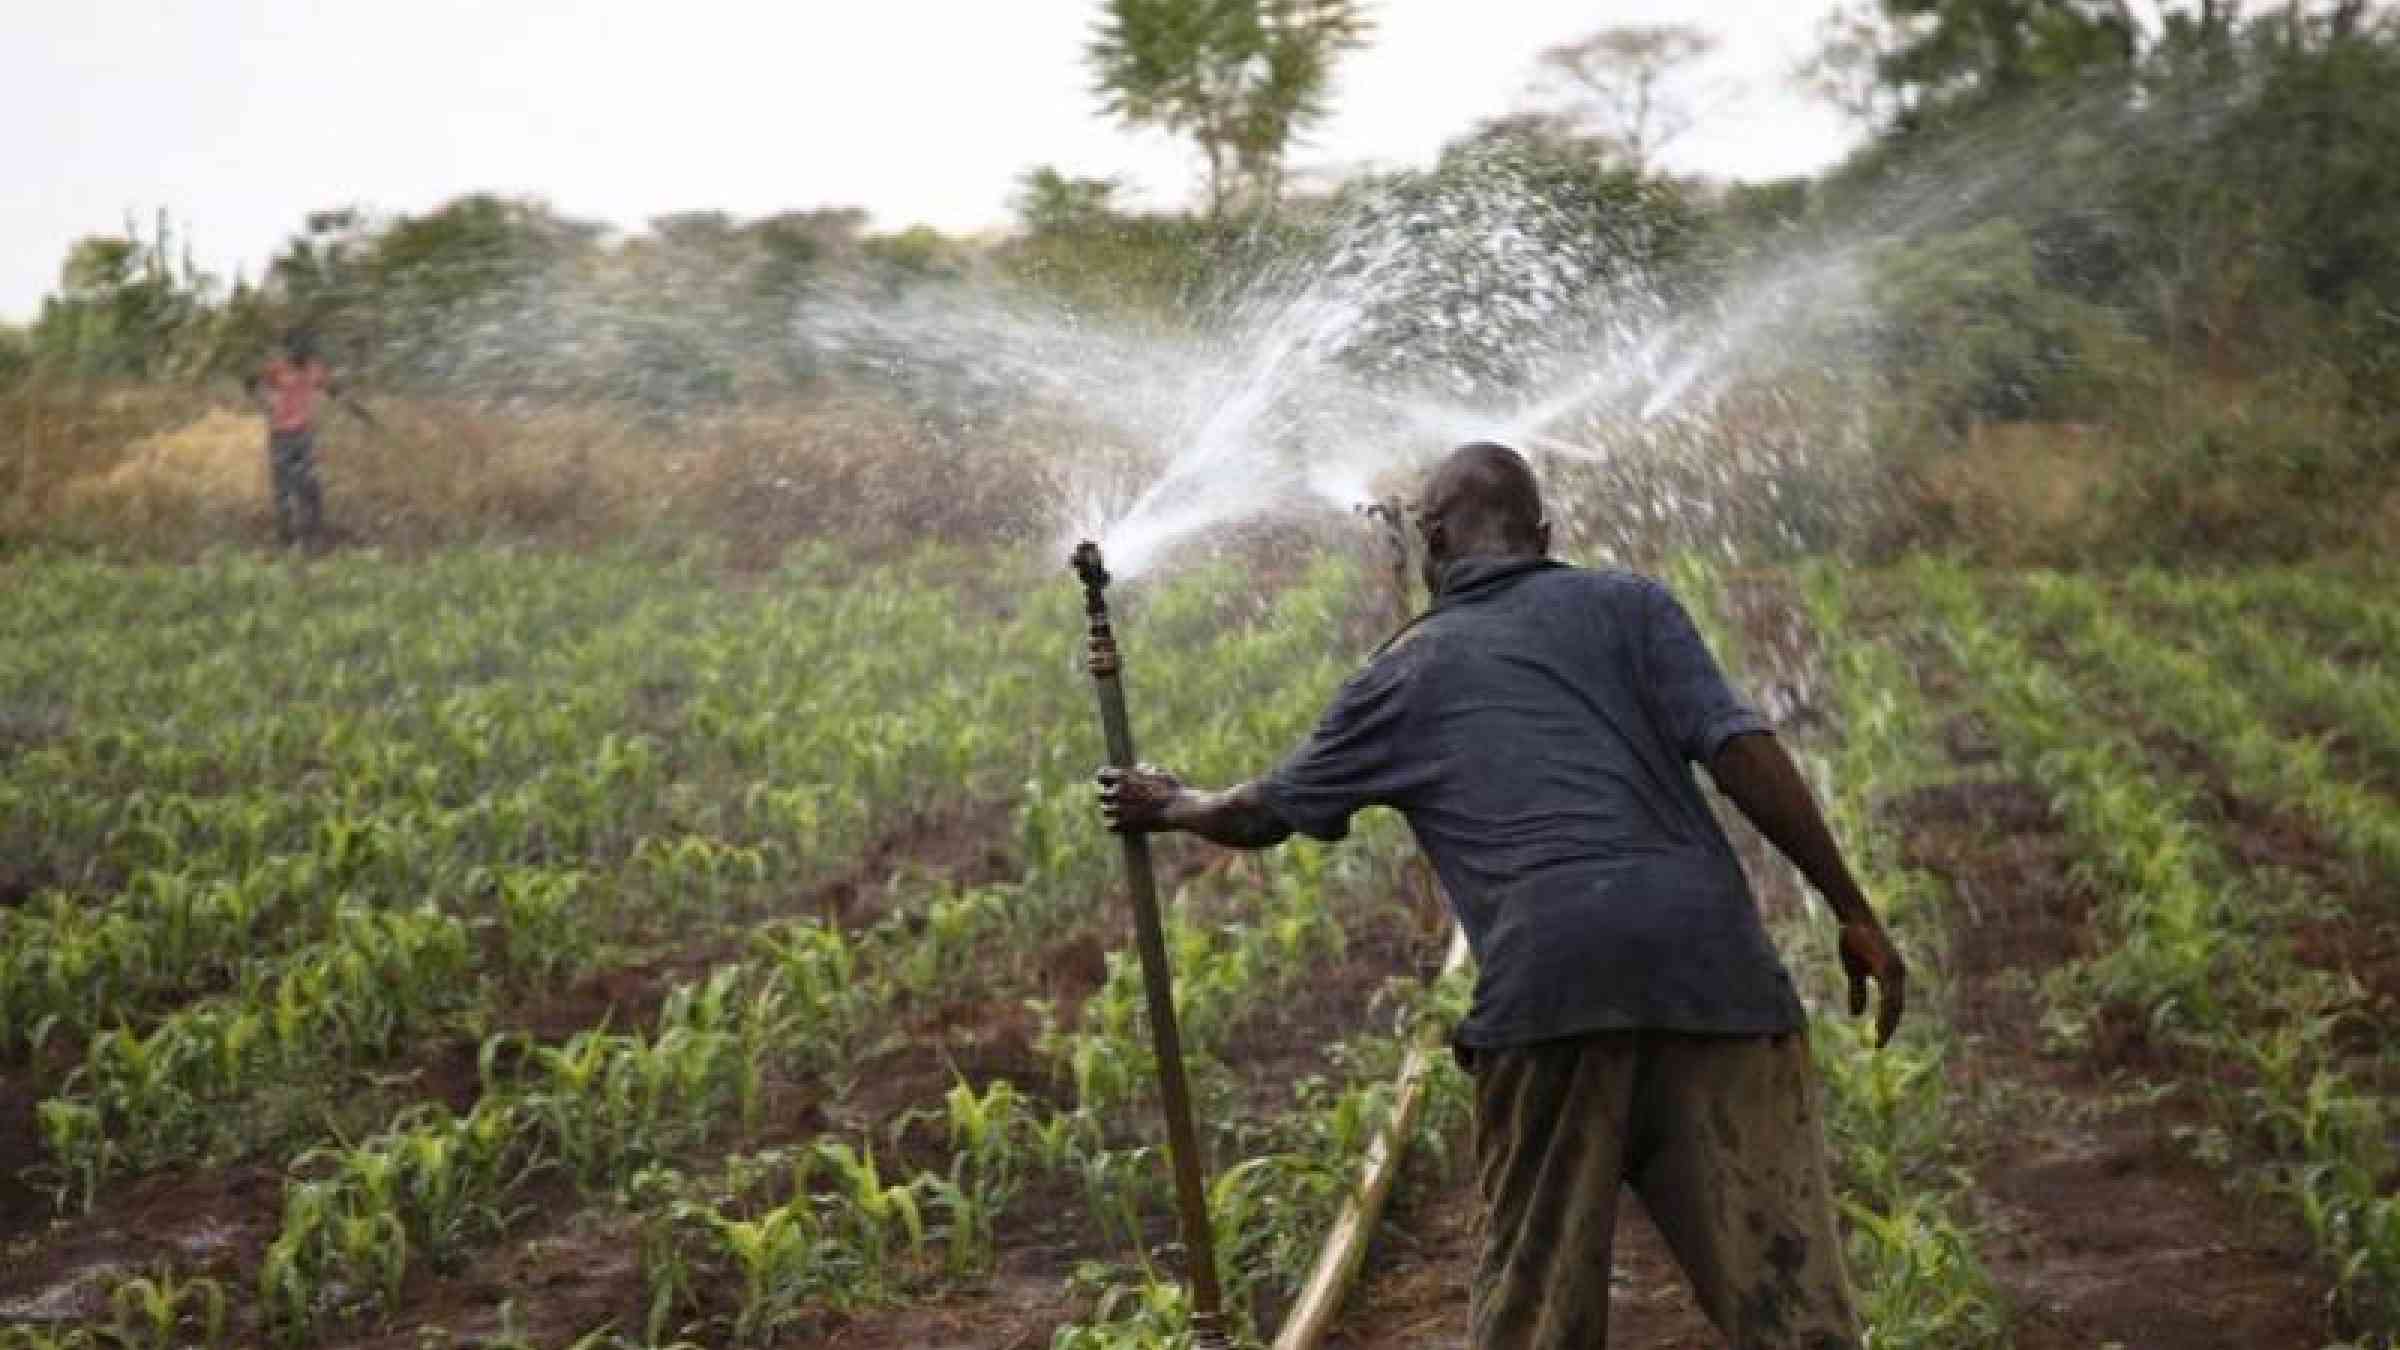 Farm worker adjusts a sprinkler irrigation pipe in a maize field. Melissa Cooperman/IFPRI, CC BY-NC-ND 2.0